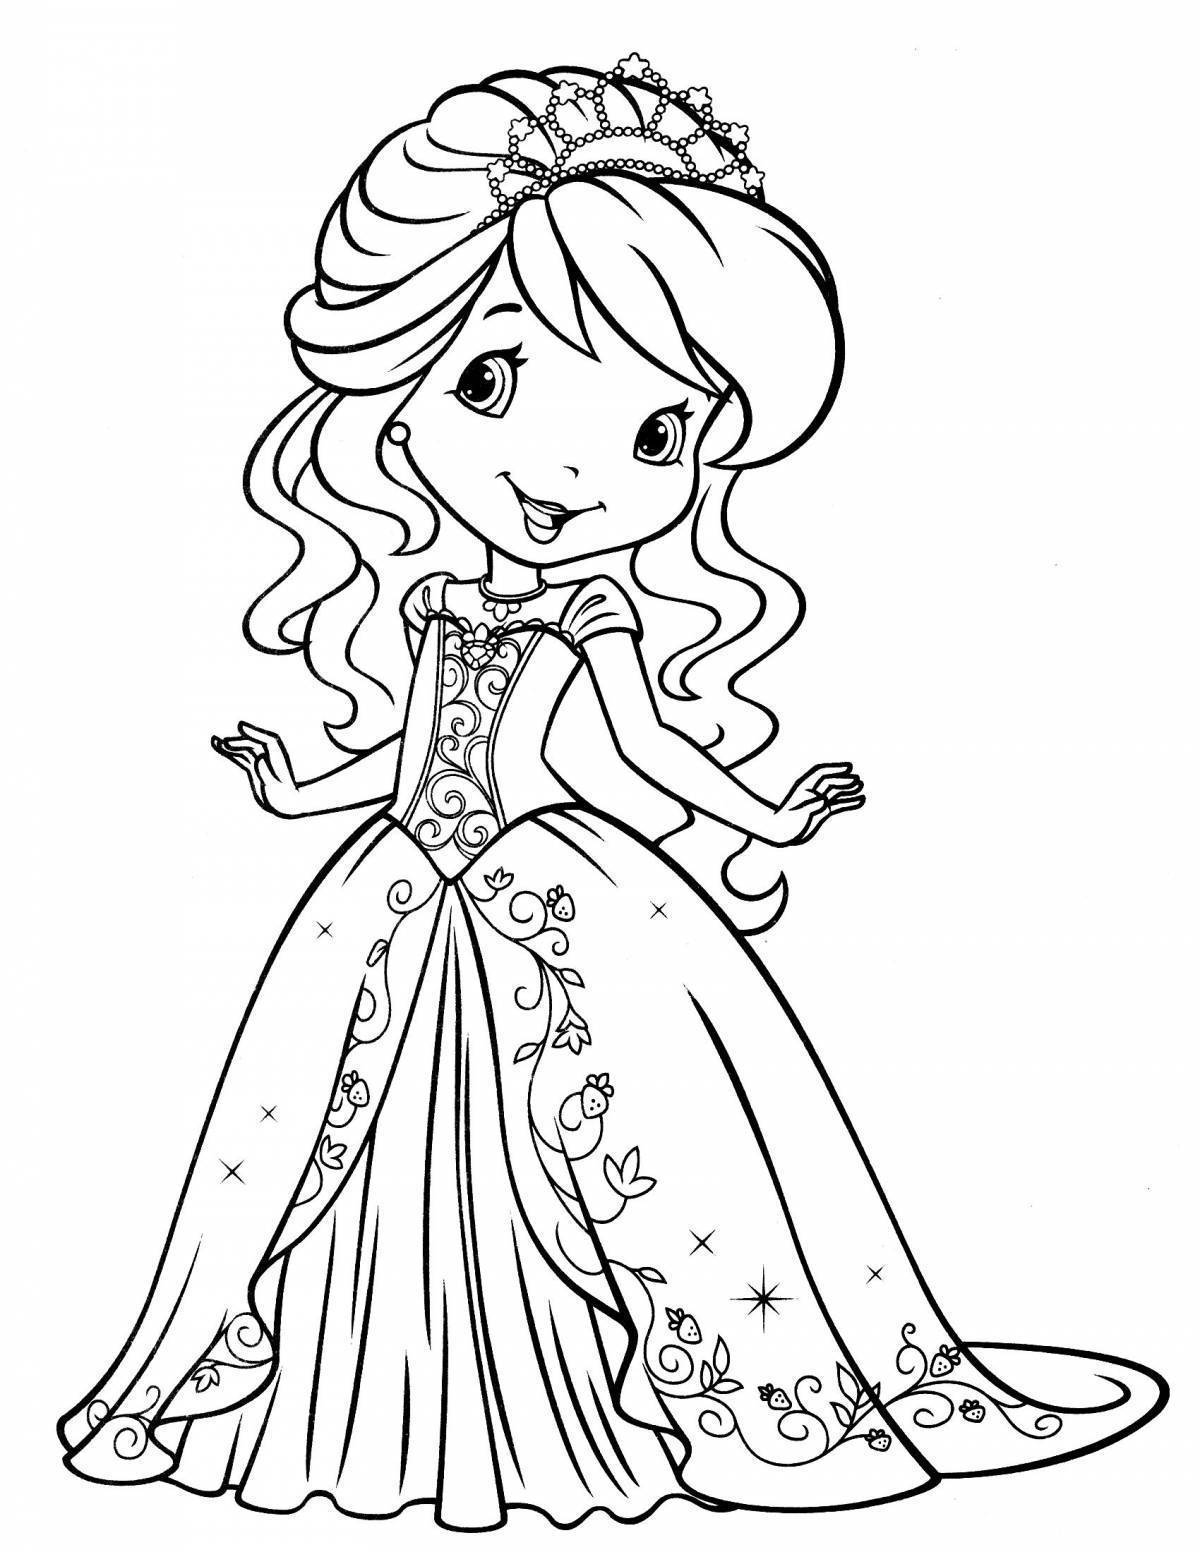 Coloring pages for girls